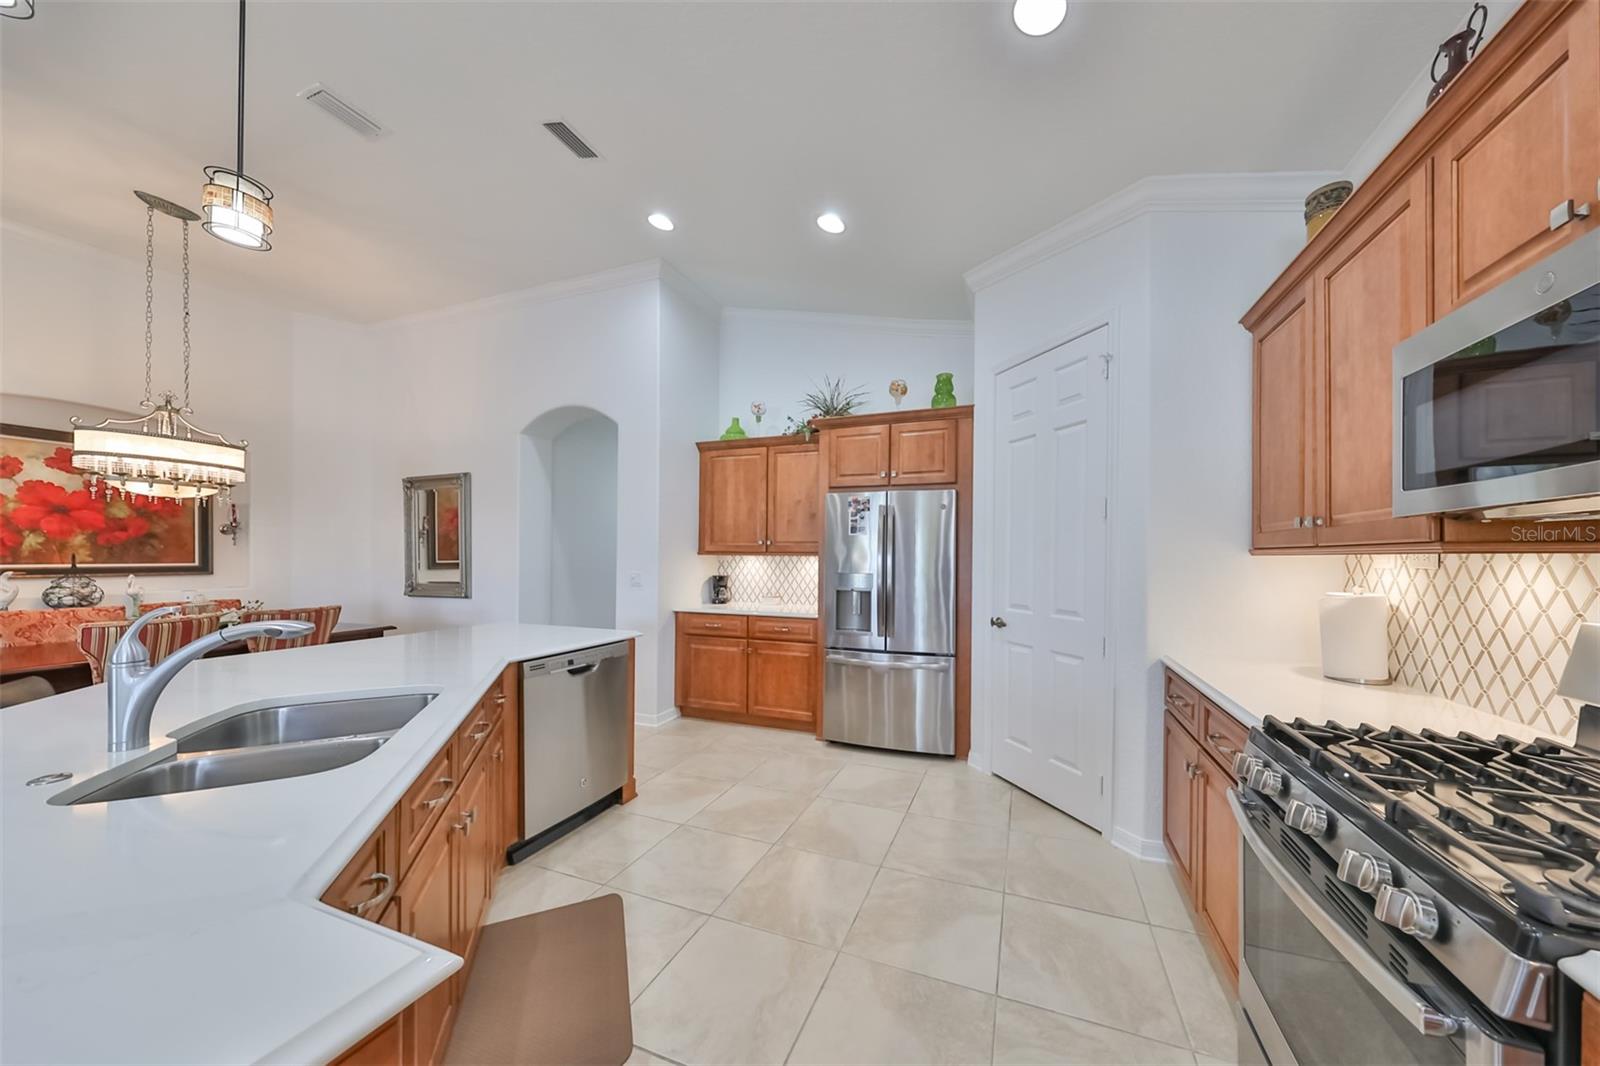 This kitchen boasts of newer, high-end stainless steel appliances, natural gas range and a large walk in pantry.